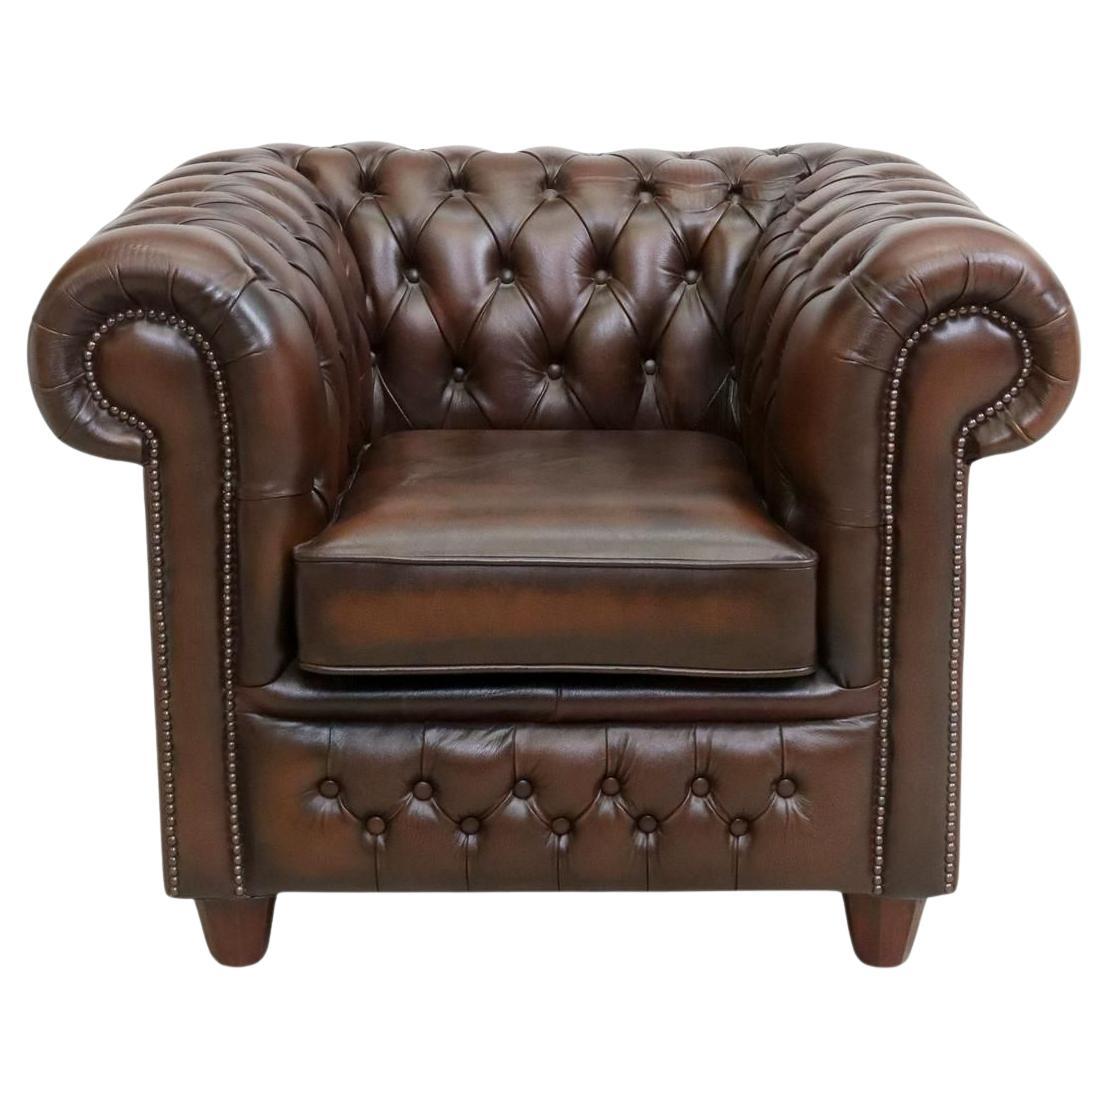 Vintage English Chesterfield Tufted Leather Club Chair For Sale